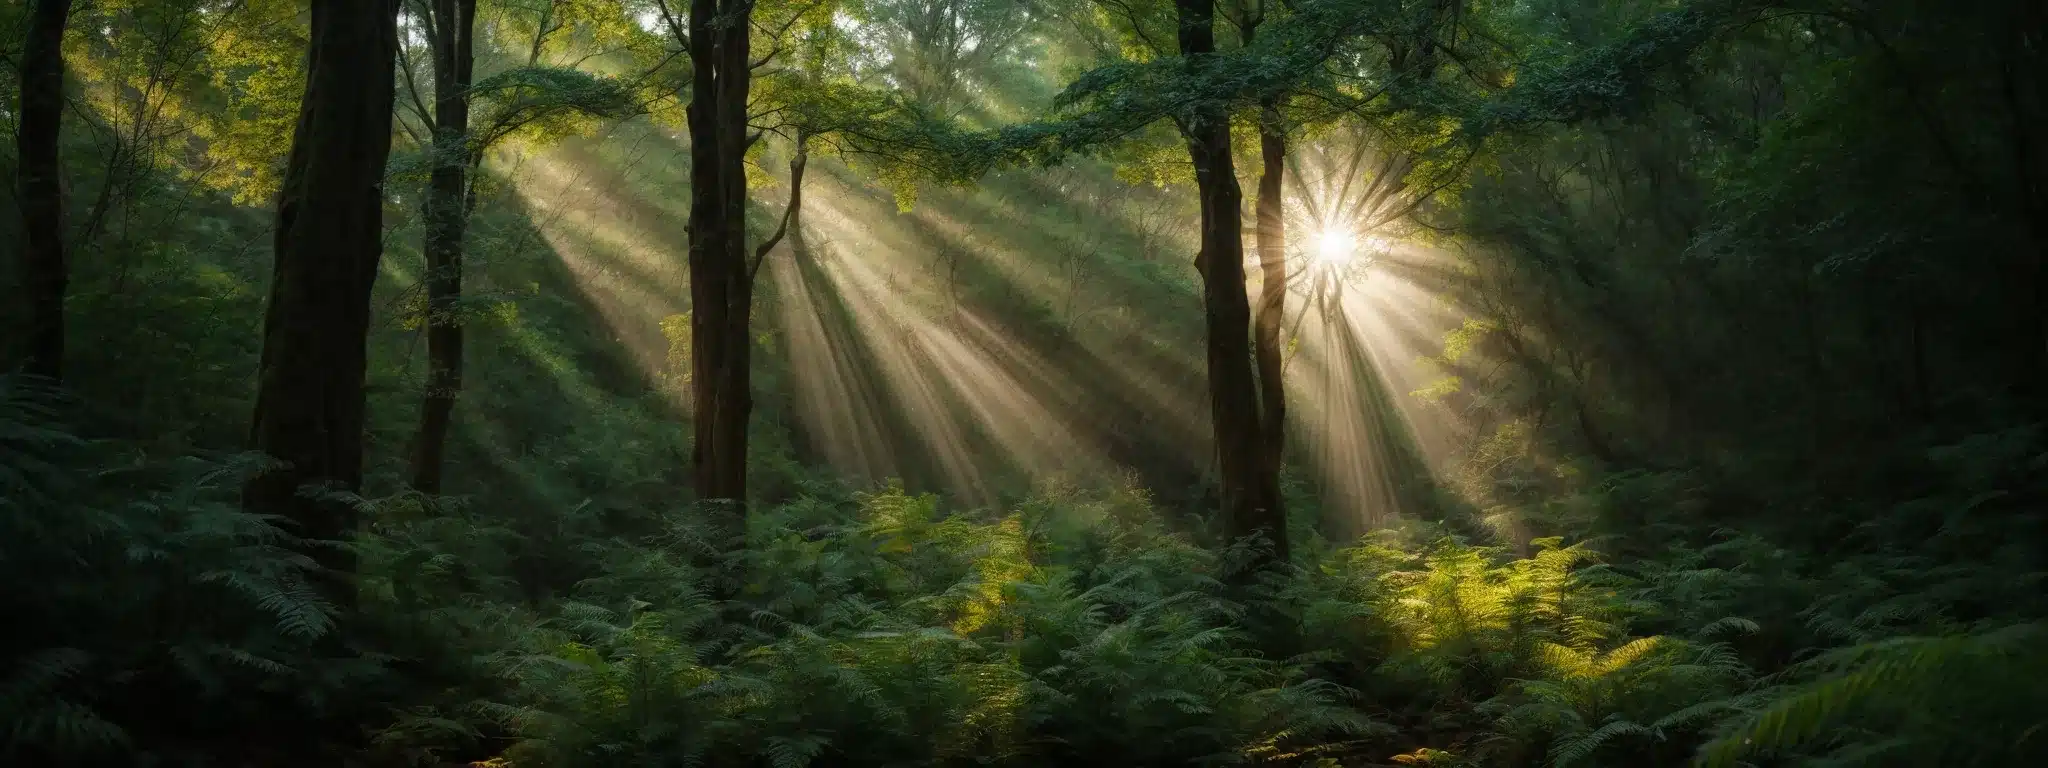 A Shaft Of Sunlight Piercing Through The Dense Foliage Of A Vibrant Forest.